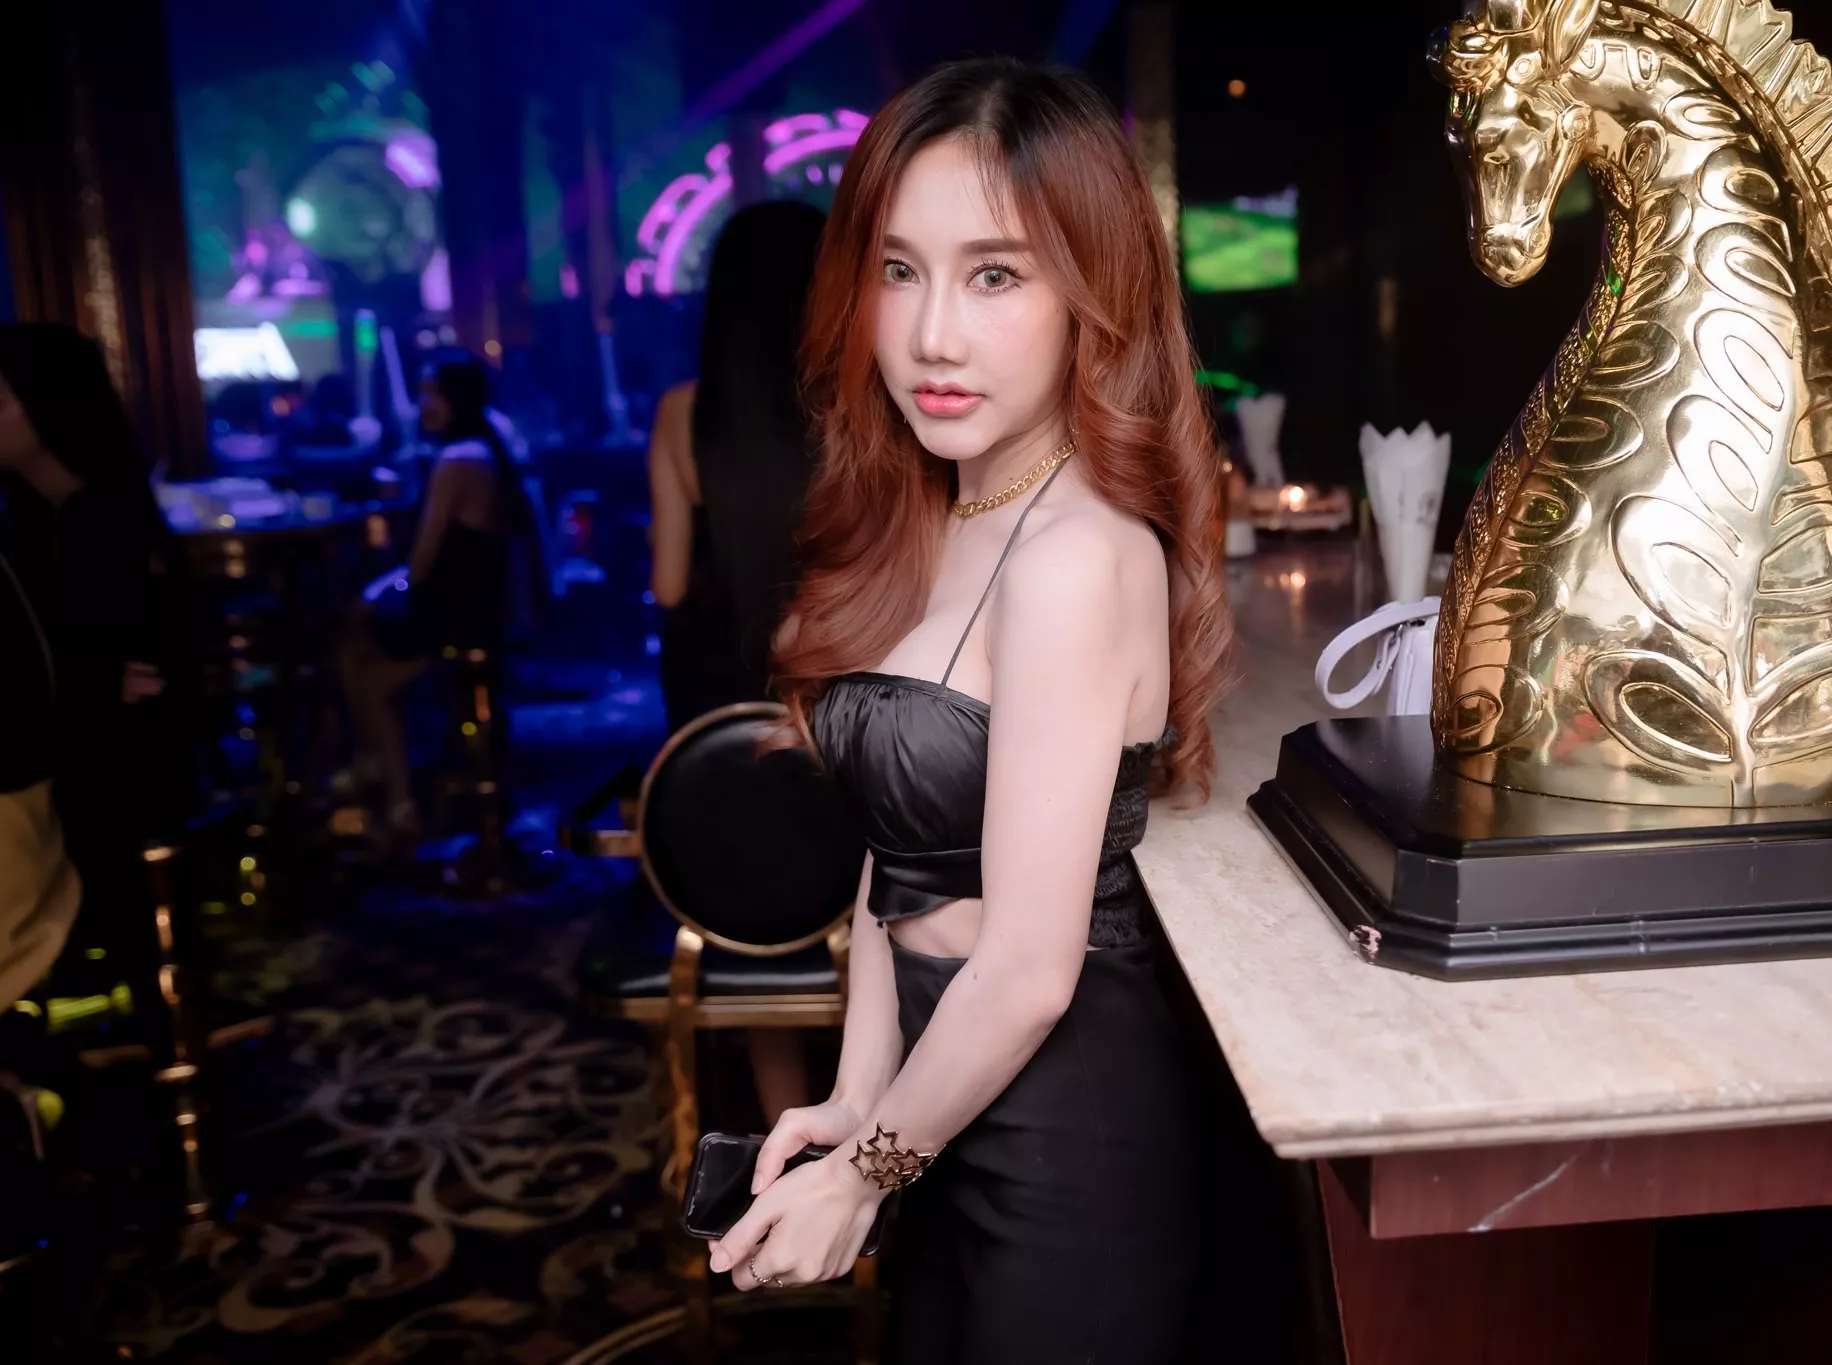 Dubai Luxury Club in Thailand, Central Asia | Nightclubs,Sex-Friendly Places - Rated 0.8